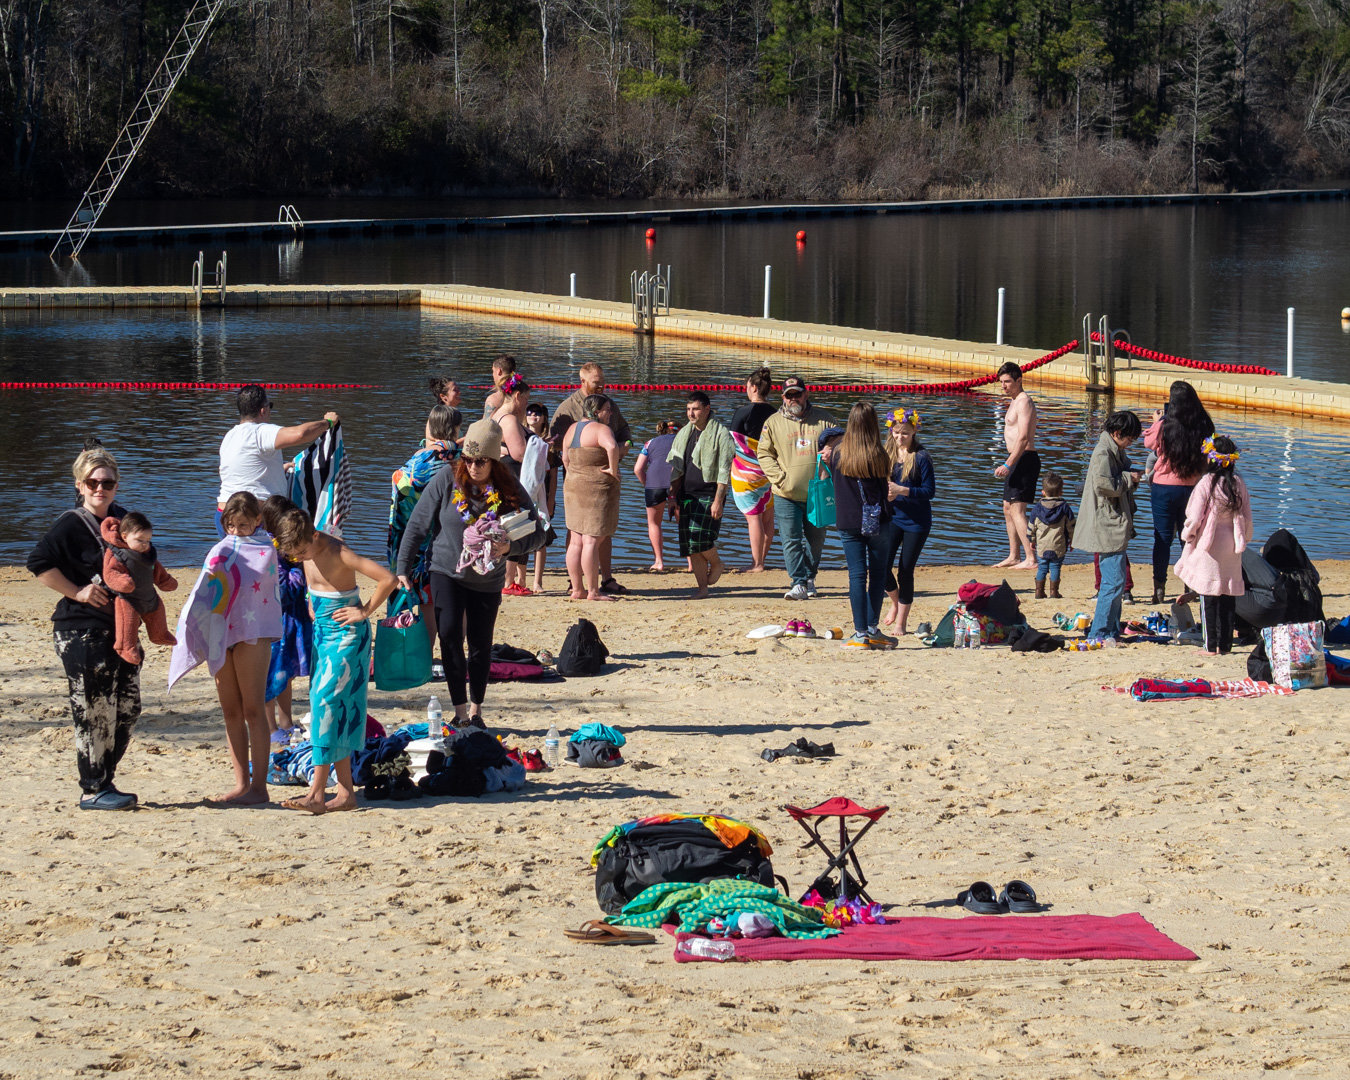 The annual Fort Bragg Polar Bear Plunge was held on Jan. 28 at Smith Lake. 